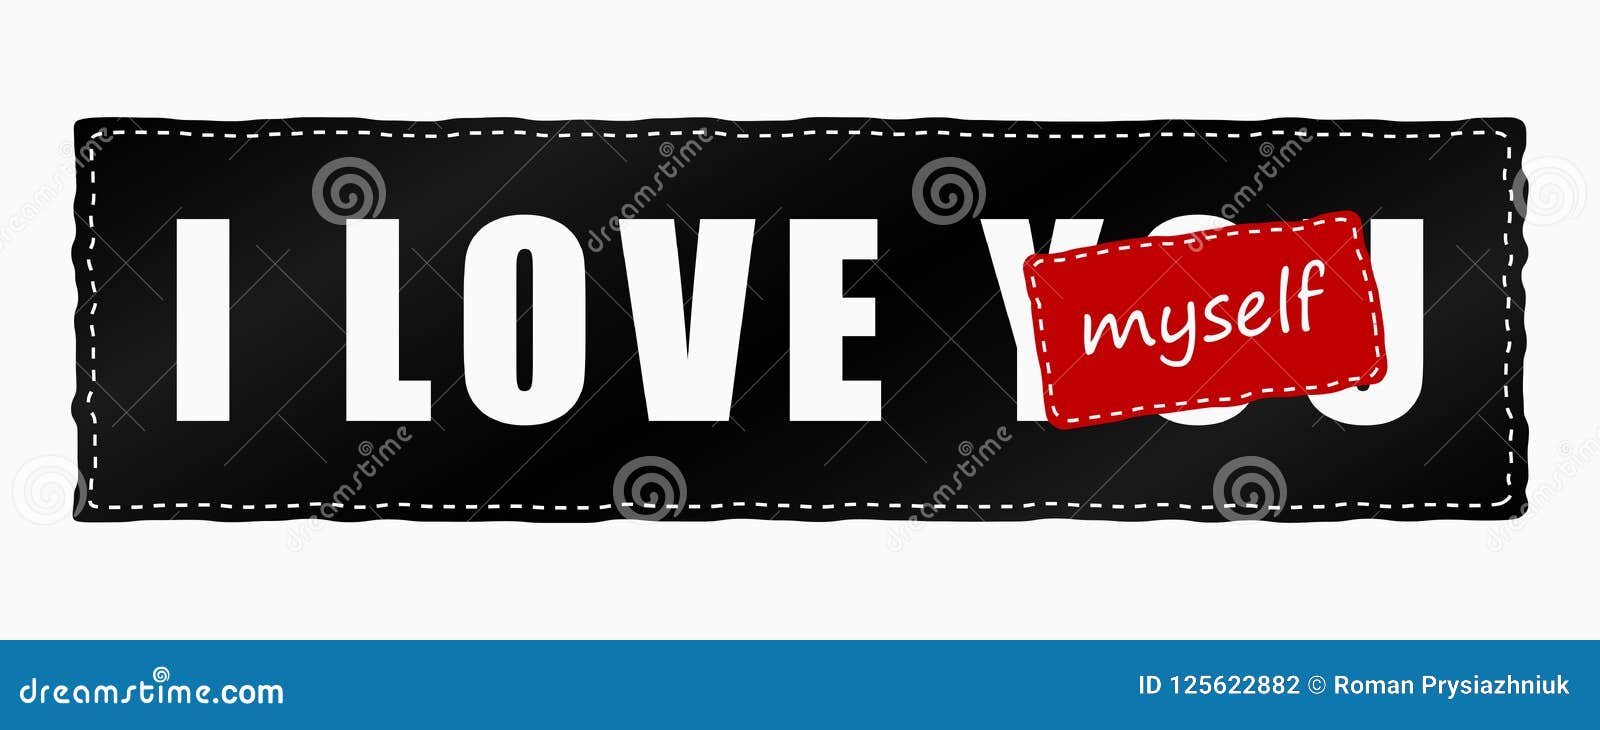 i love myself - slogan on embroidery. fashion typography for girls t-shirt. graphics  for apparel, patch, sticker. .